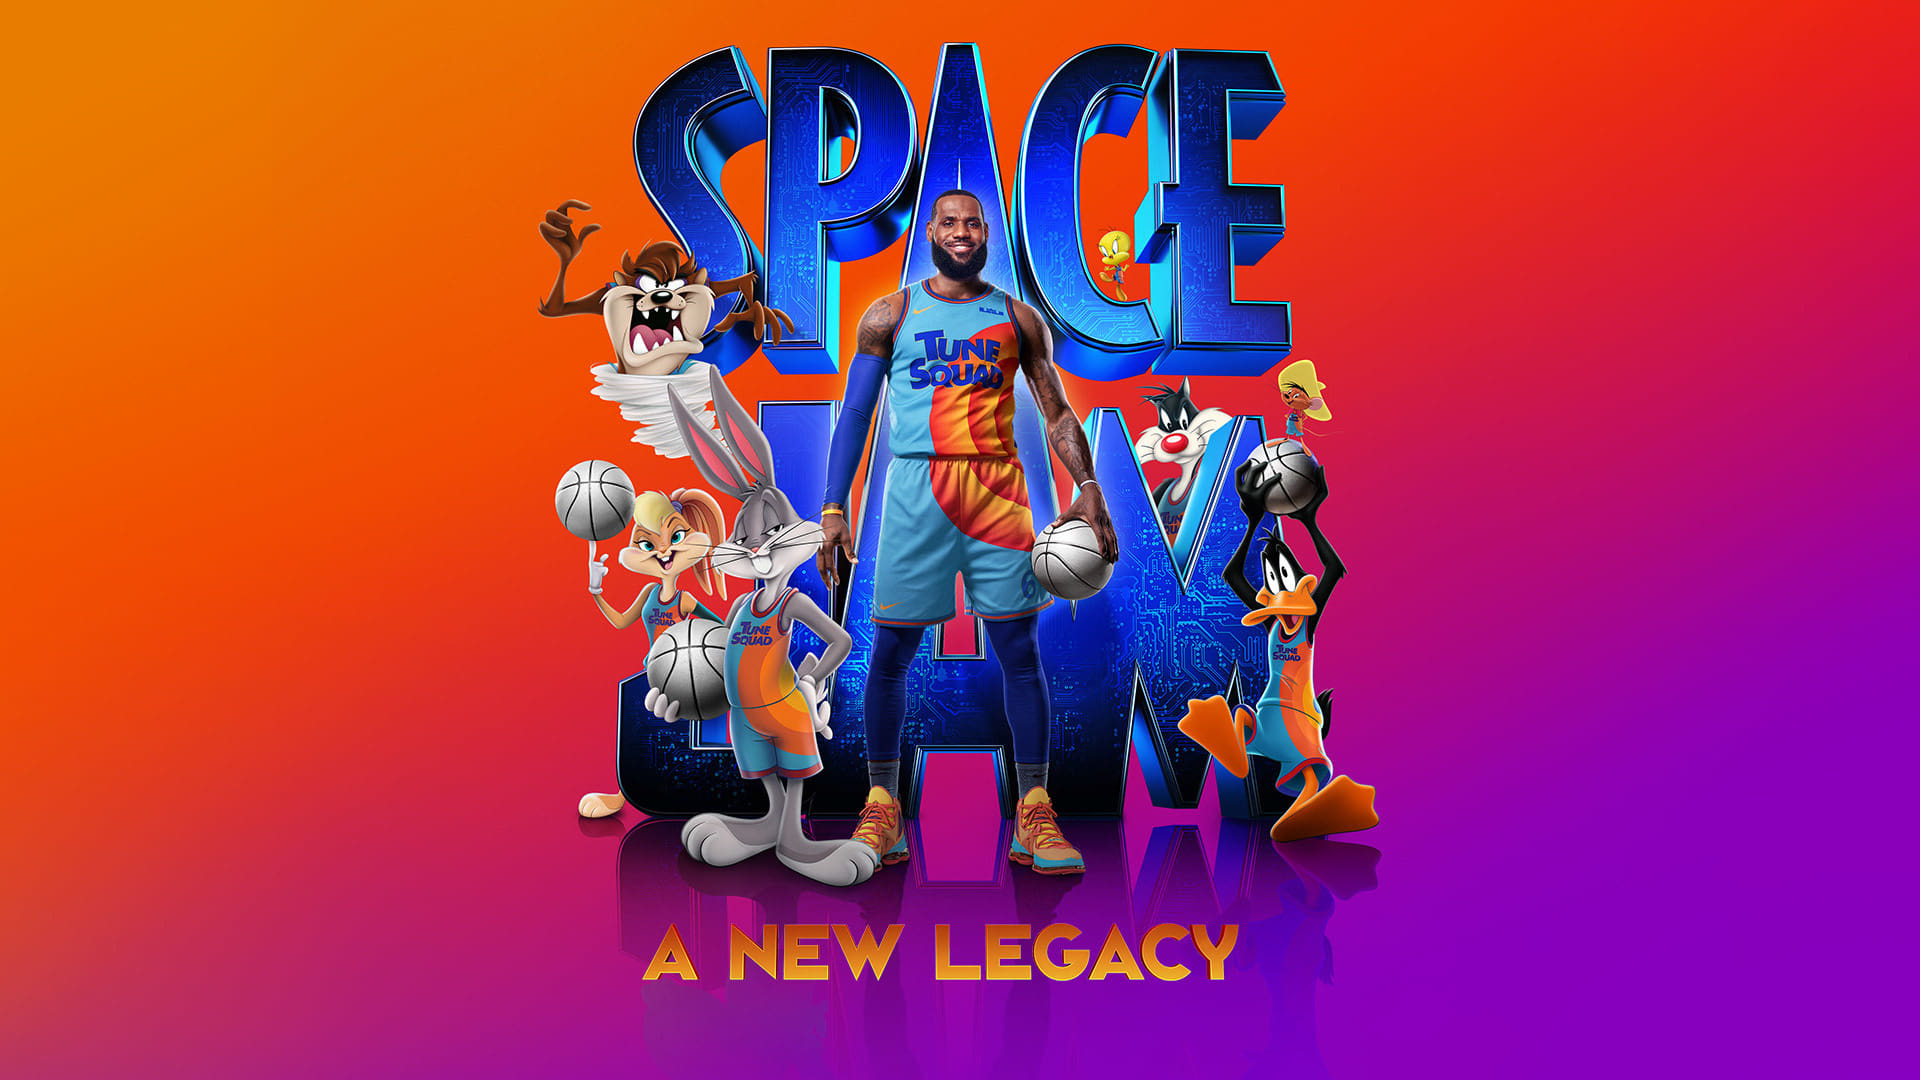 Space Jam 2 LeBron James Wallpaper, HD Movies 4K Wallpapers, Images and